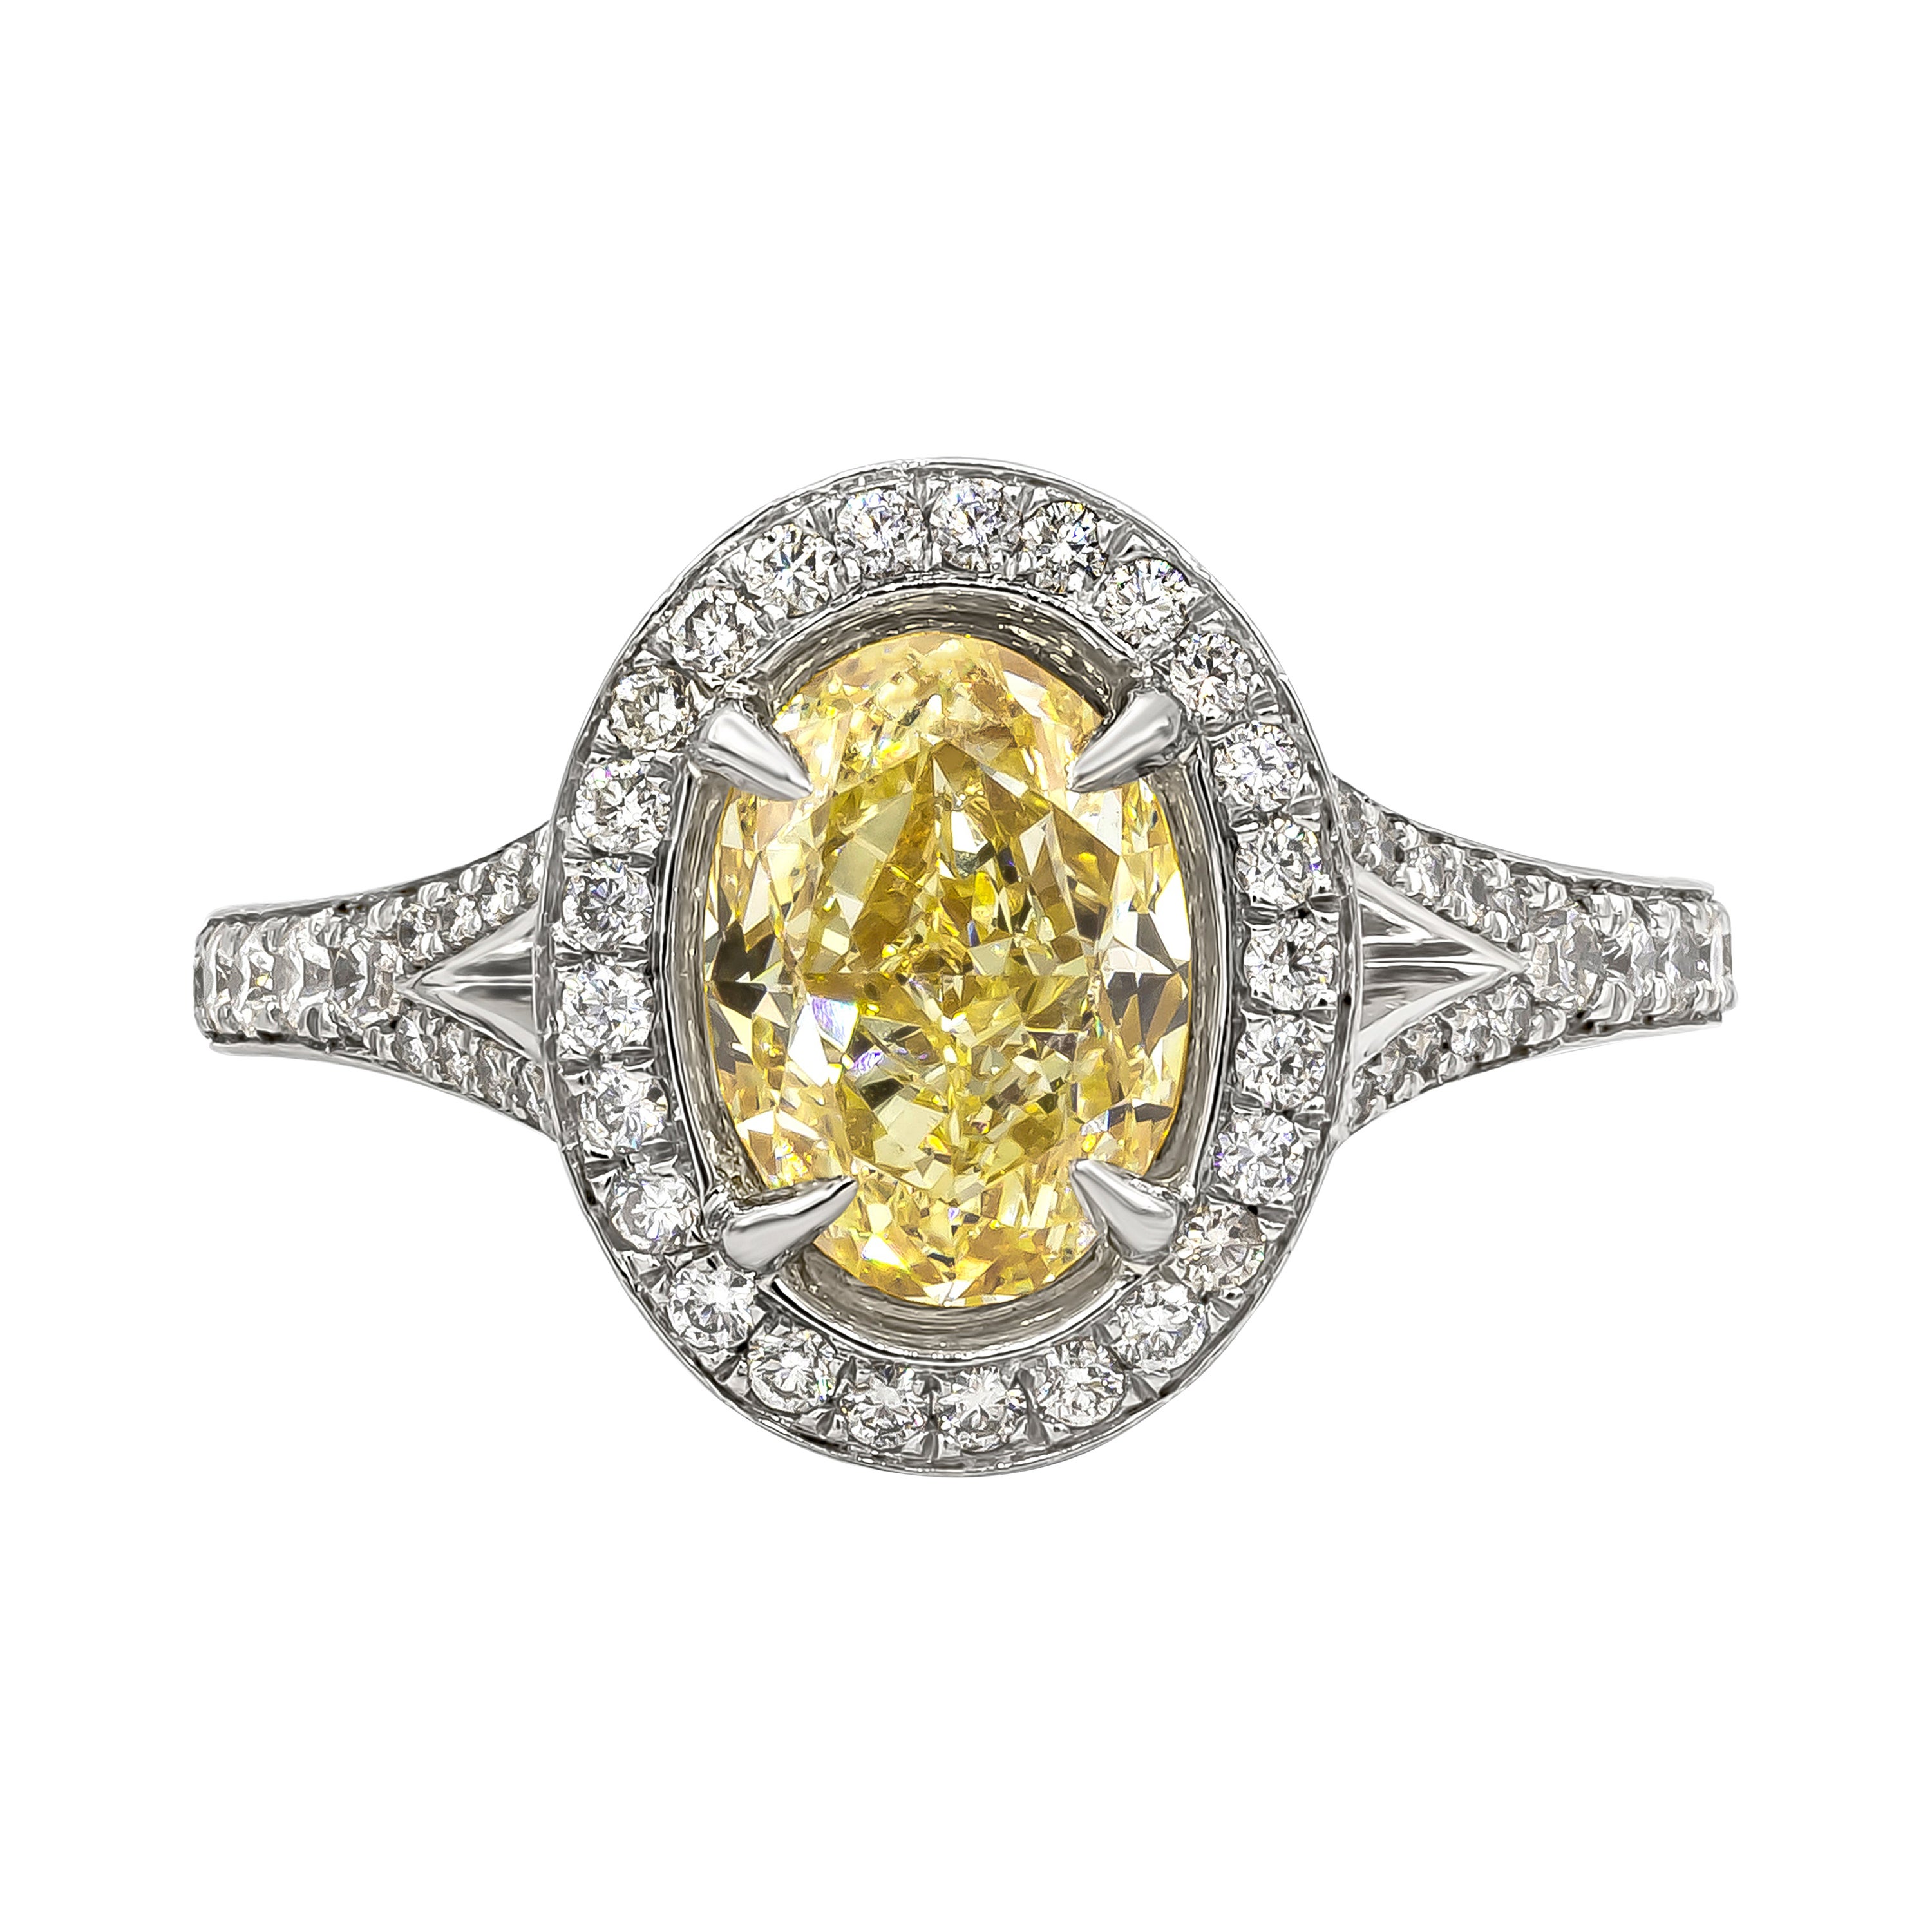 GIA Certified 1.76 Carats Oval Cut Fancy Light Yellow Diamond Engagement Ring For Sale